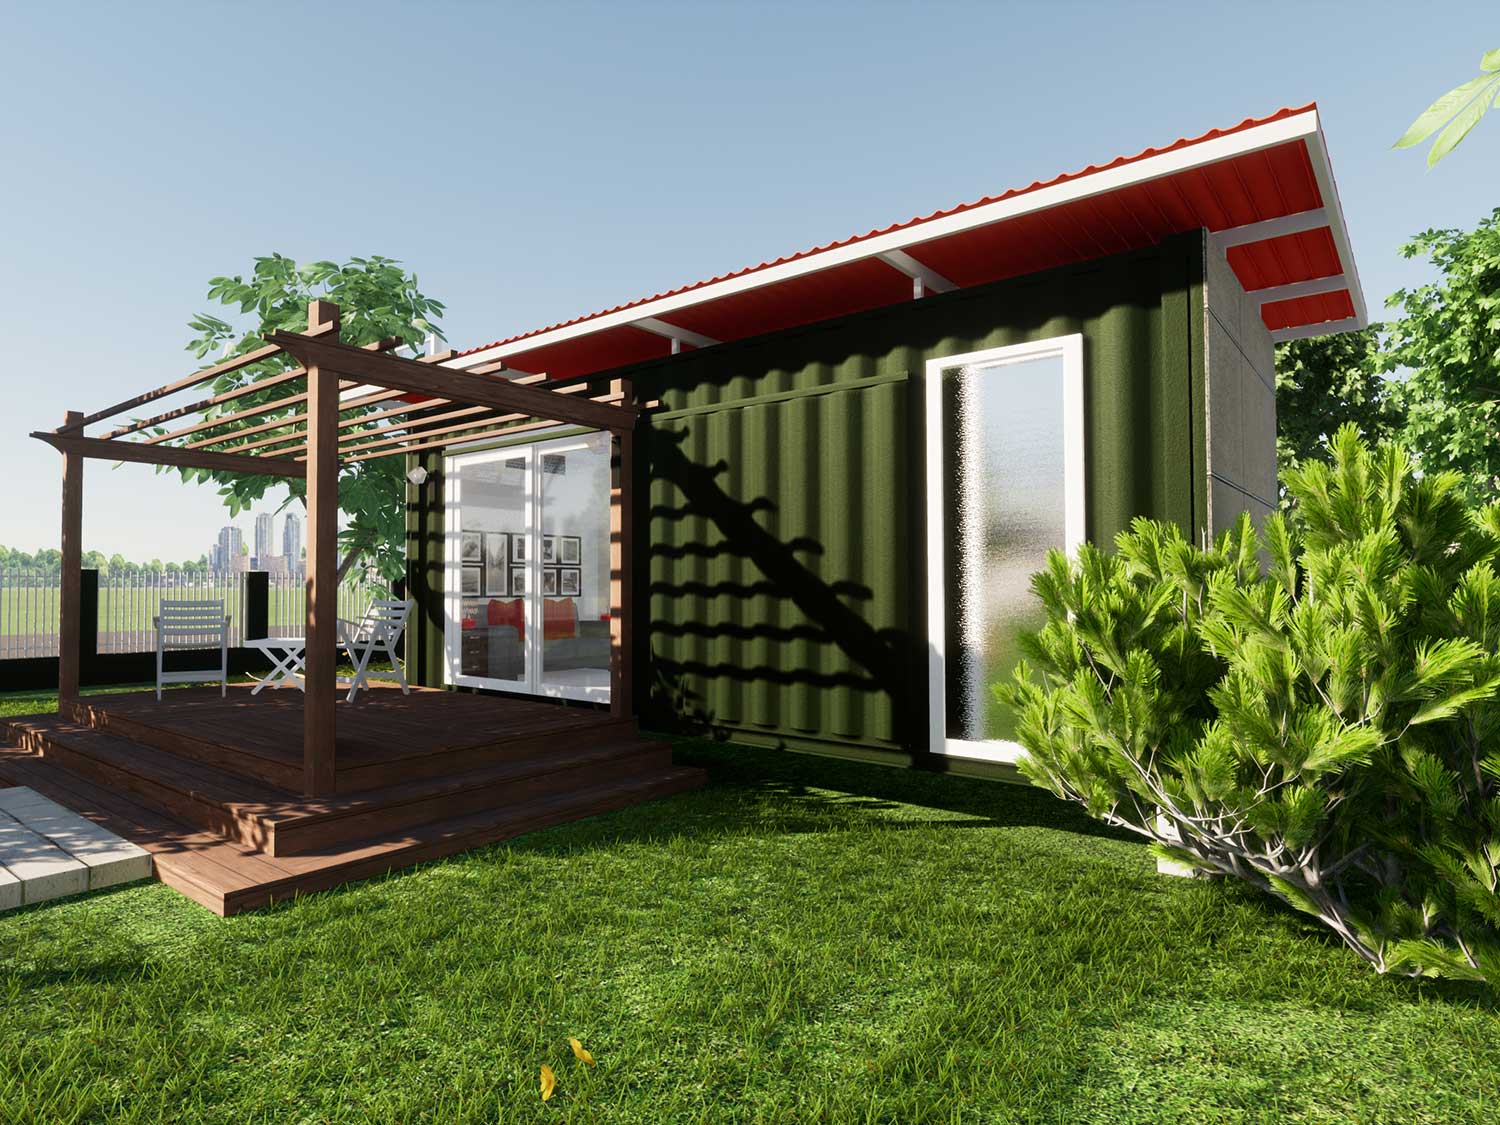 An illustration of a modern one-room structure in a garden built from a shipping container